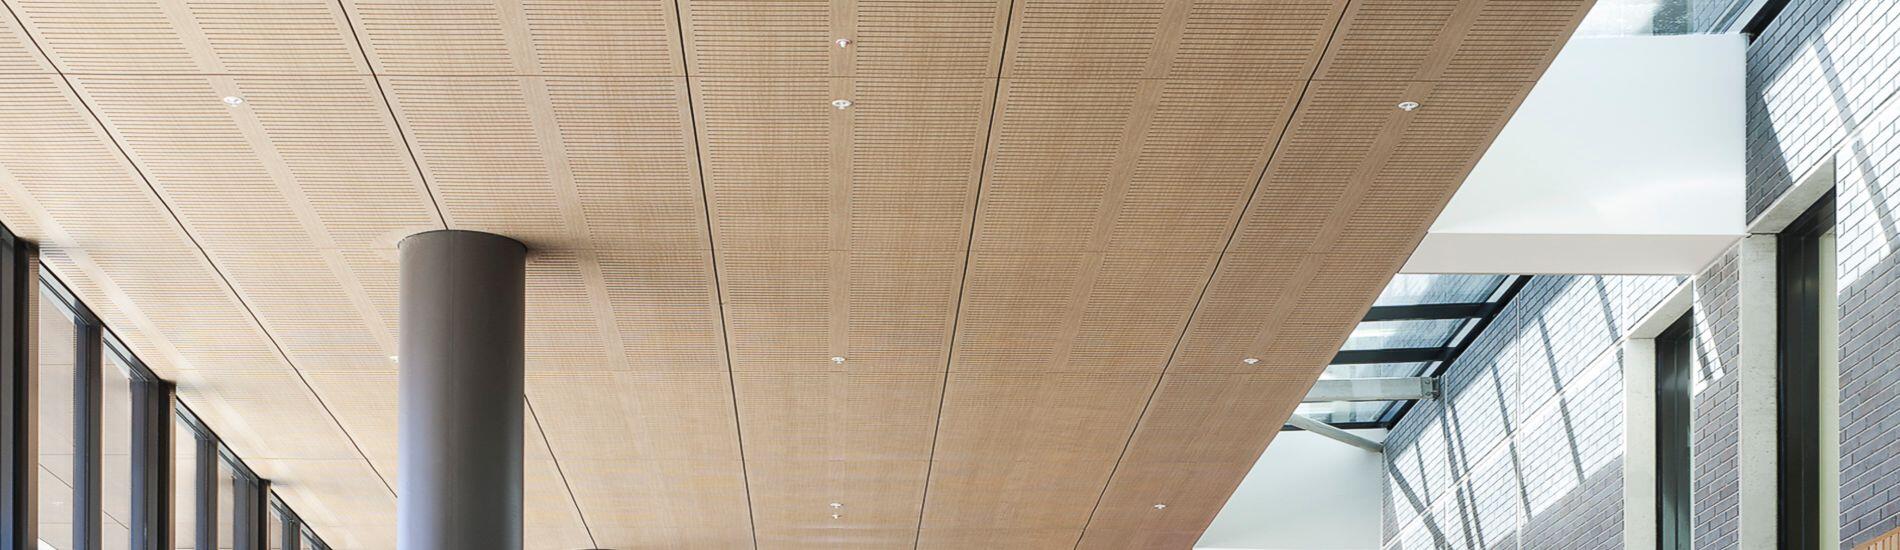 SUPACOUSTIC Slotted Acoustic Panel Ceiling Meet BCA Compliance for Ceiling of Large Hospital Atrium